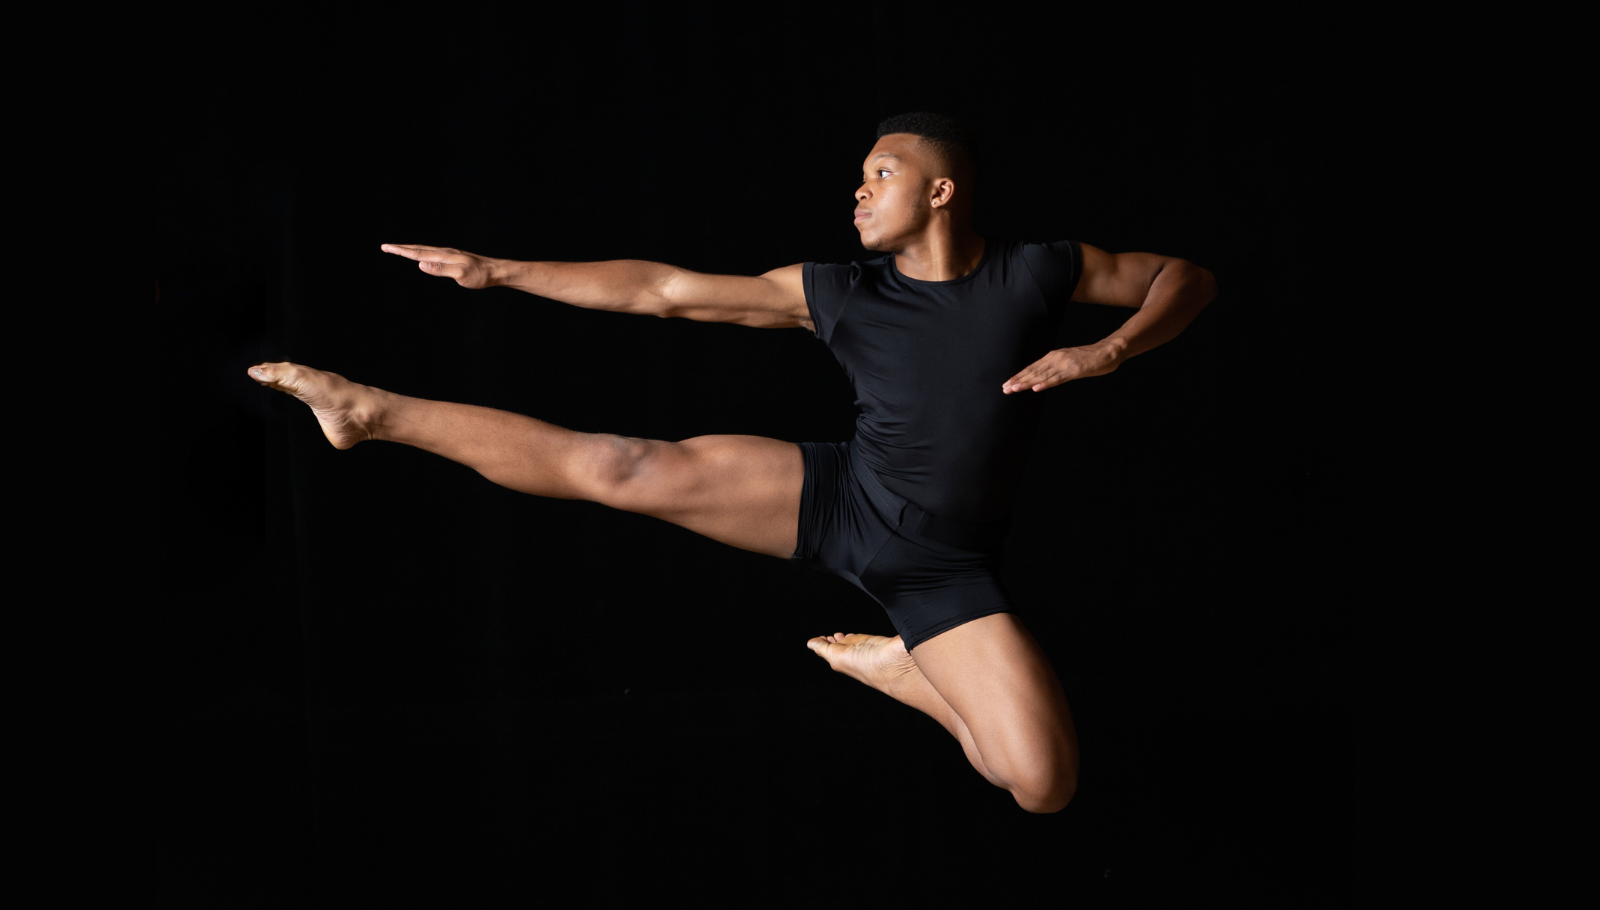 Dancer jumps in the air with right leg and arm extended